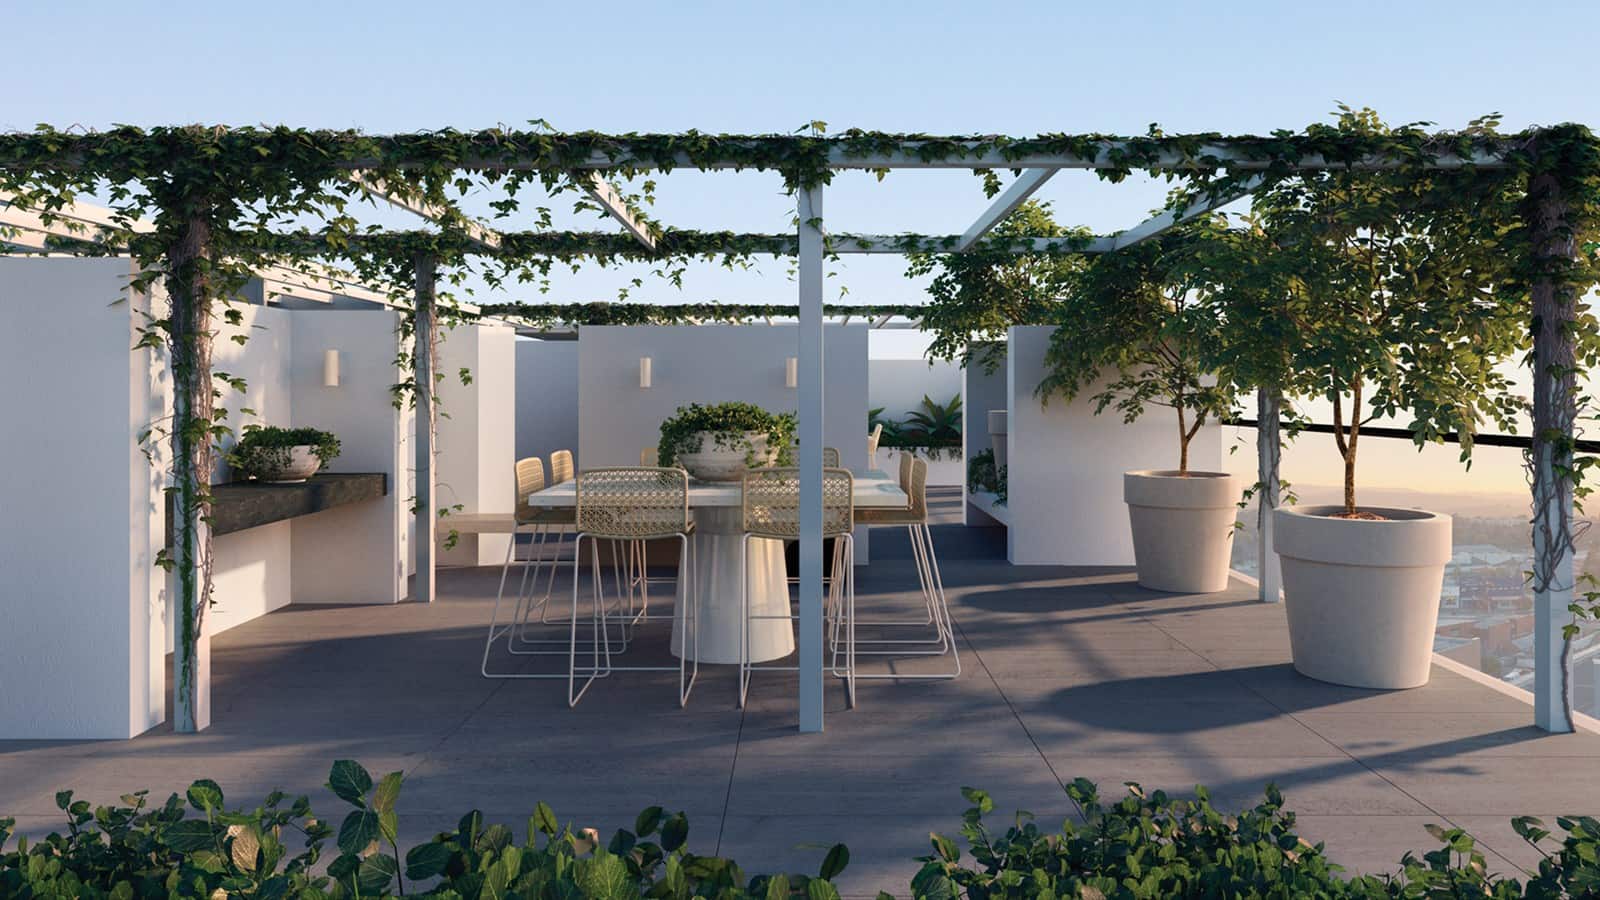 Rooftop entertainment space render. Supplied by developer.